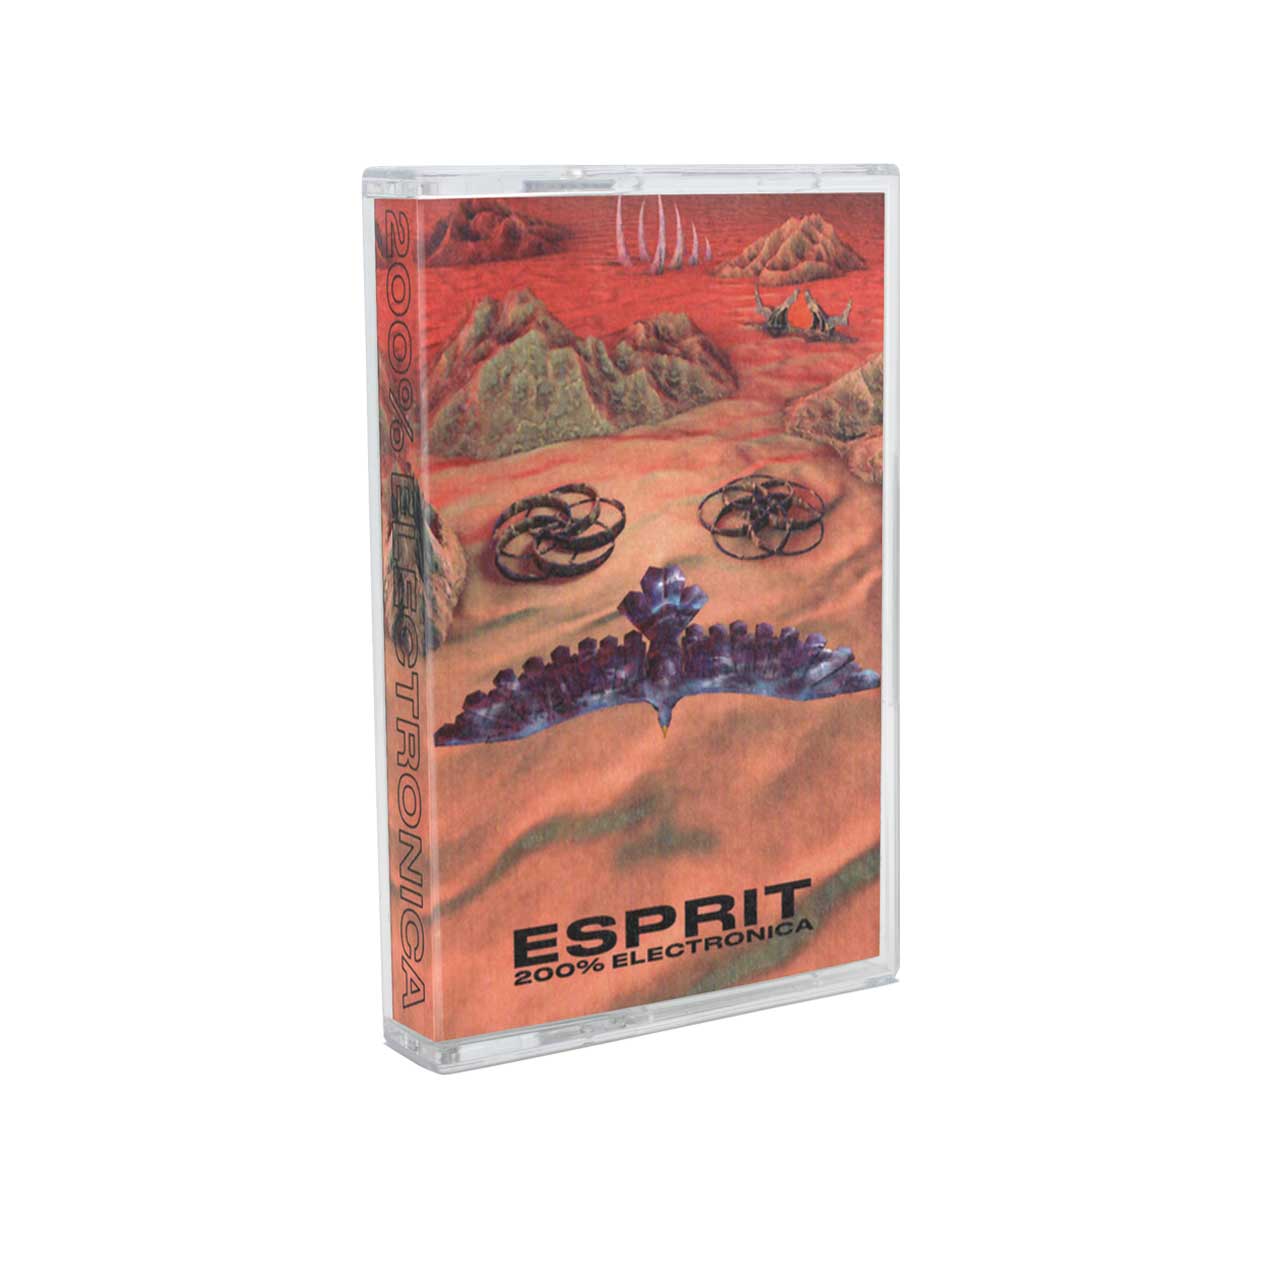 ESPRIT 空想 - 200% Electronica Cassette - 100% Electronica Official Store (Photo 1)